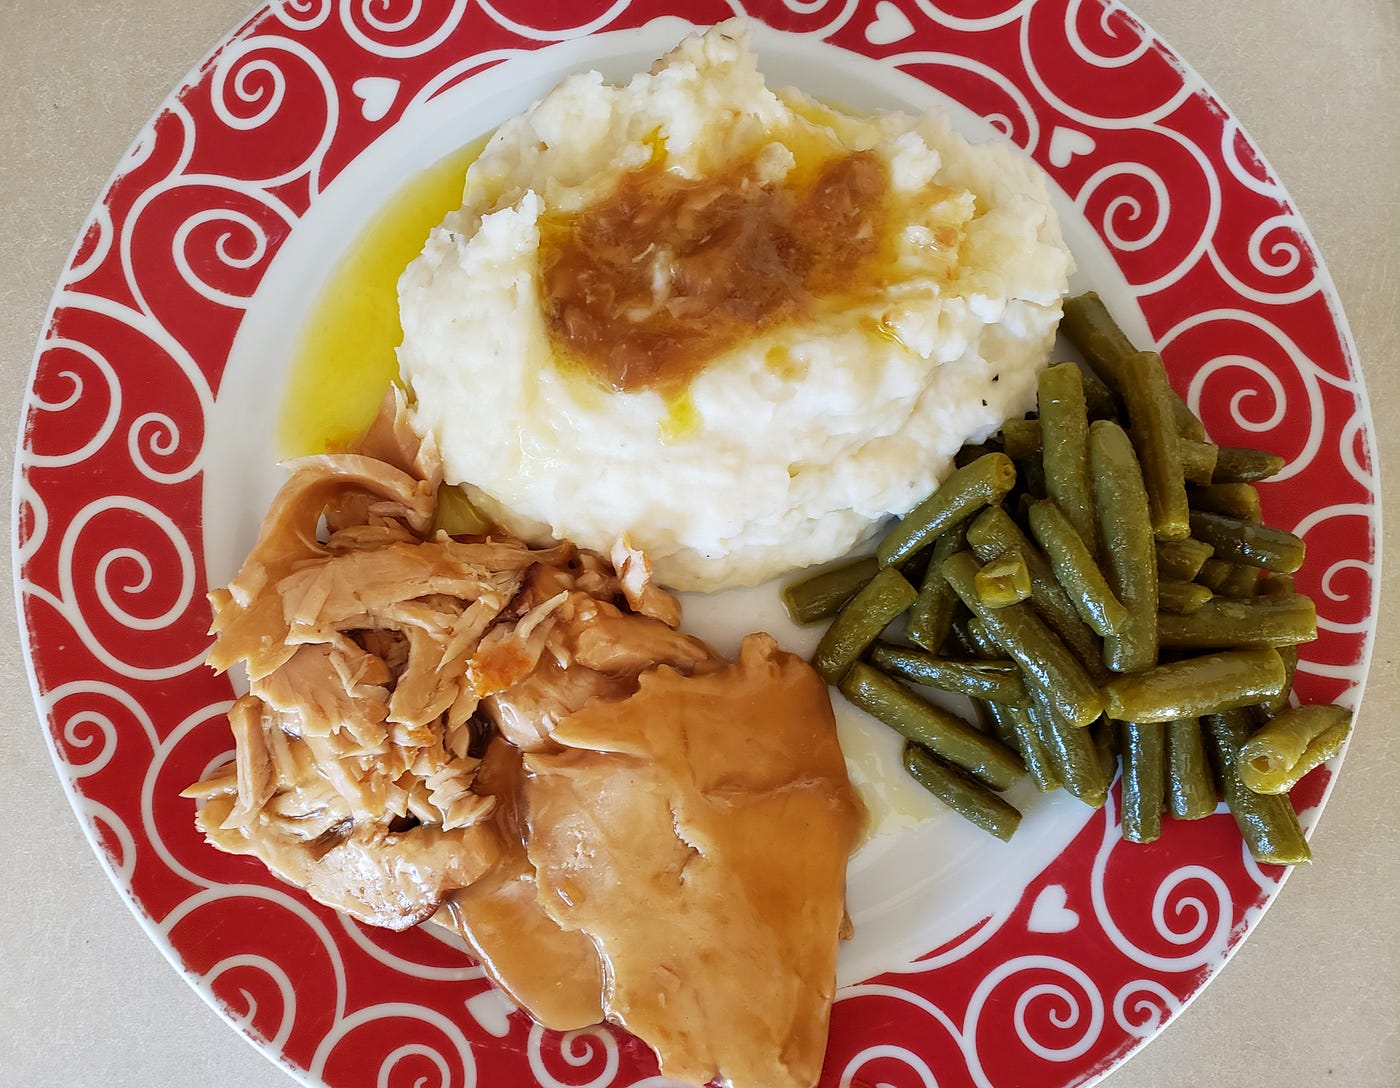 Not from Cracker Barrel - The Daily Cuppa - Medium